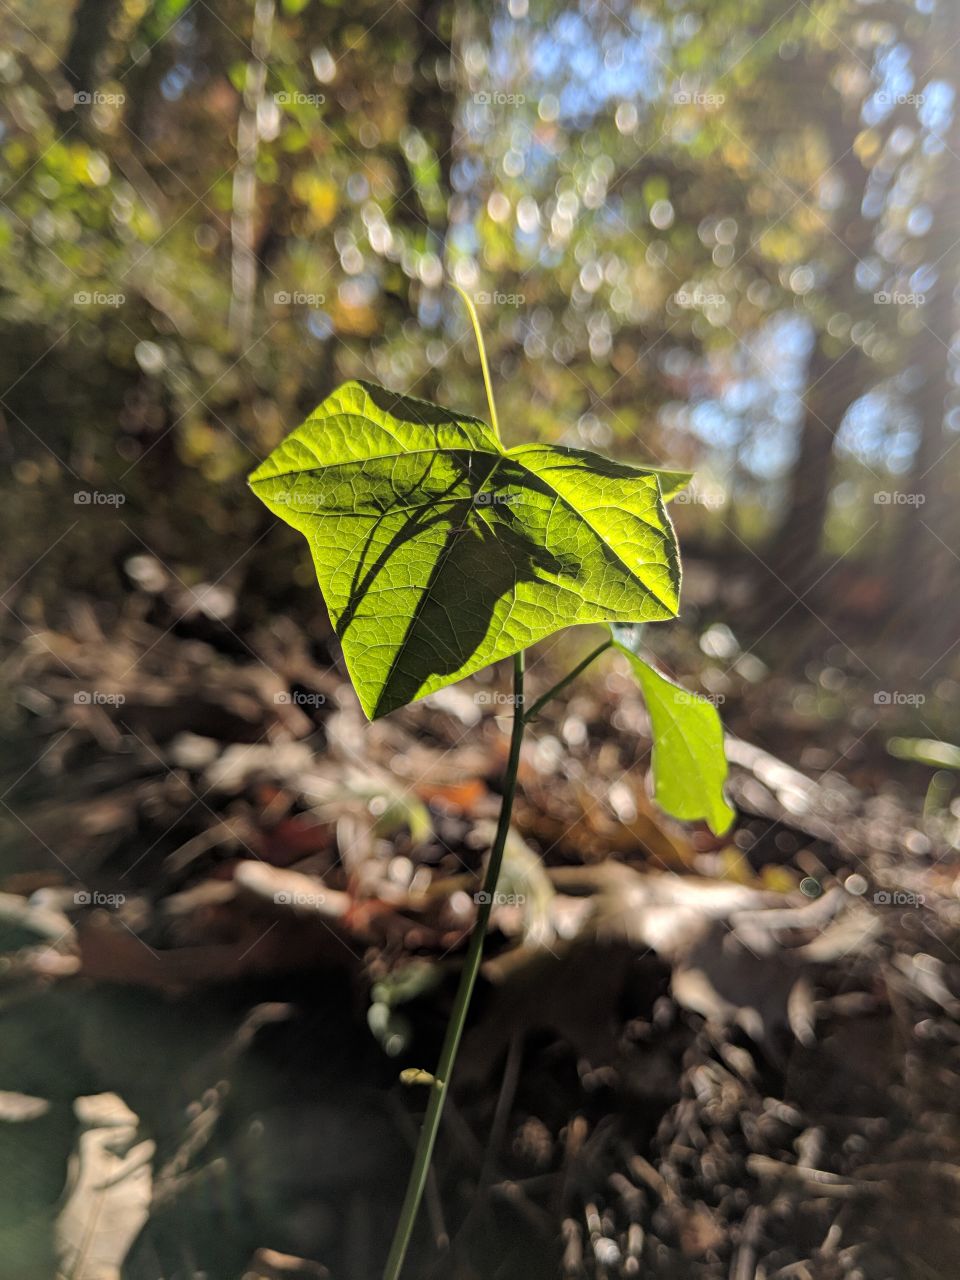 A little leaf growing from the ground up. For anyone who likes a more down to earth perspective!